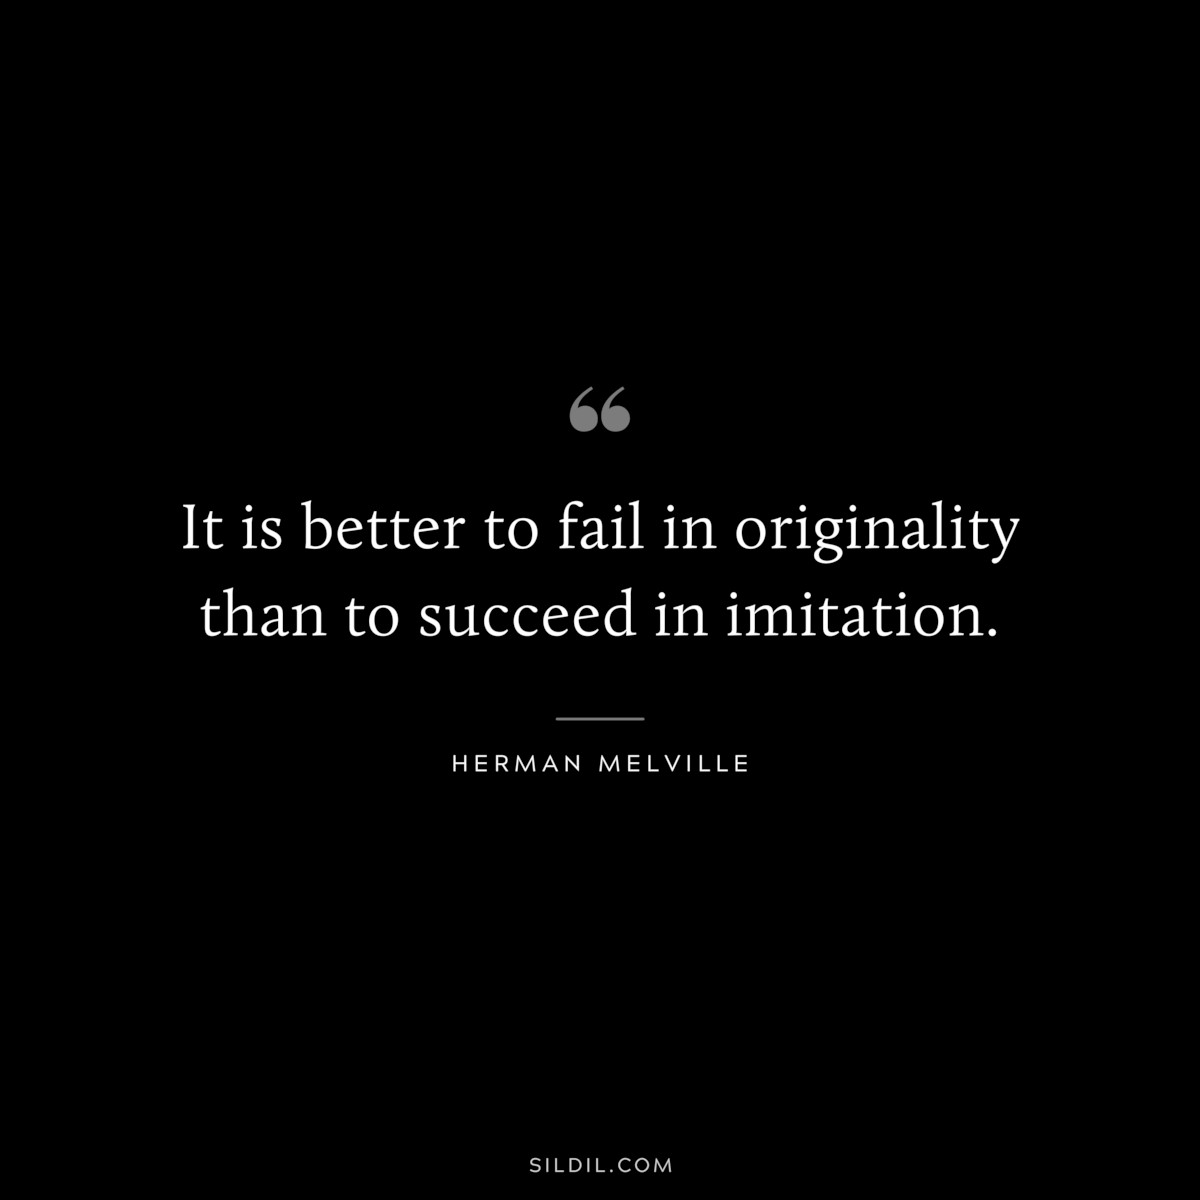 It is better to fail in originality than to succeed in imitation. ― Herman Melville